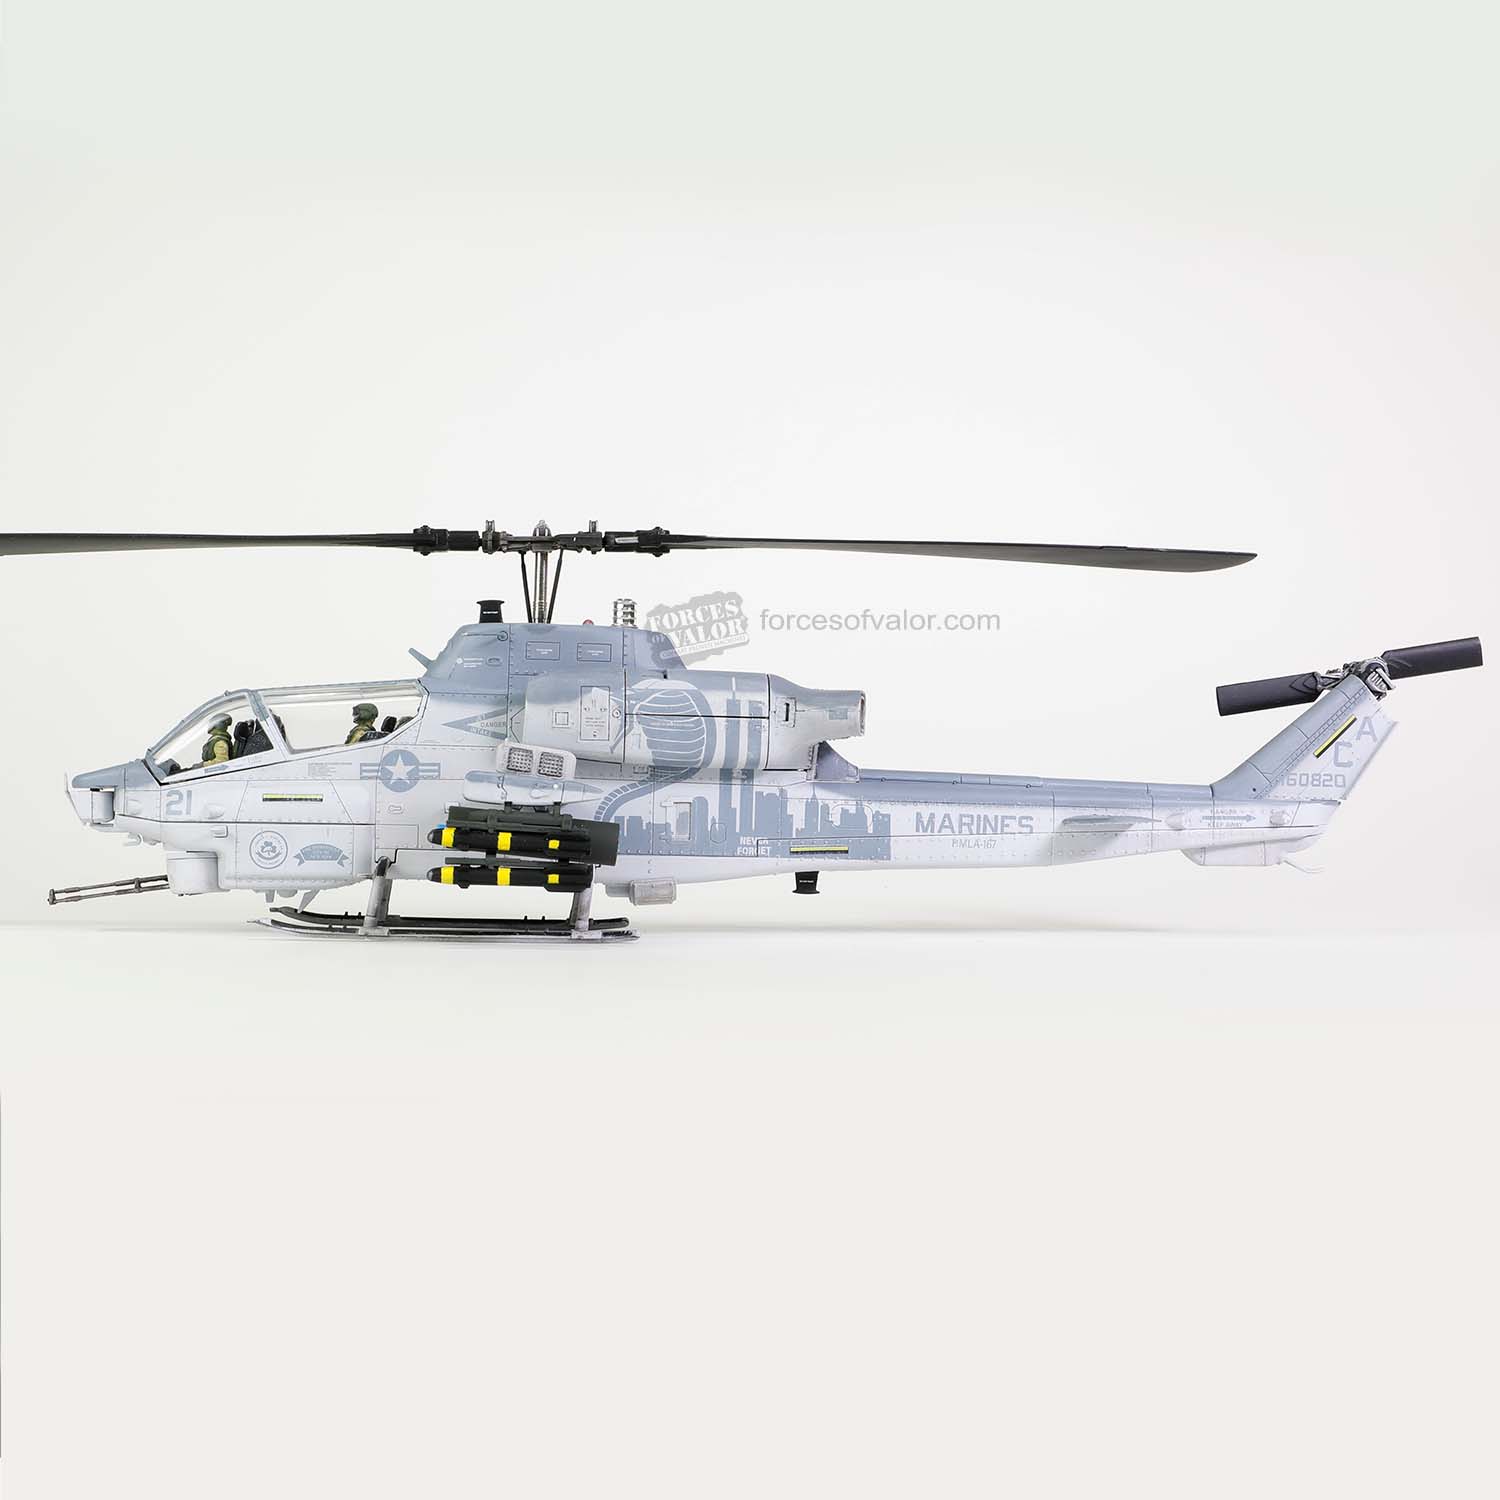 forcesofvalor-FOV-820004A-2-3-US-Marine-Corps-Bell-AH-1W-Whiskey-Cobra-Helicopter-NTS-911-tribute-scheme-Camp-Bastion